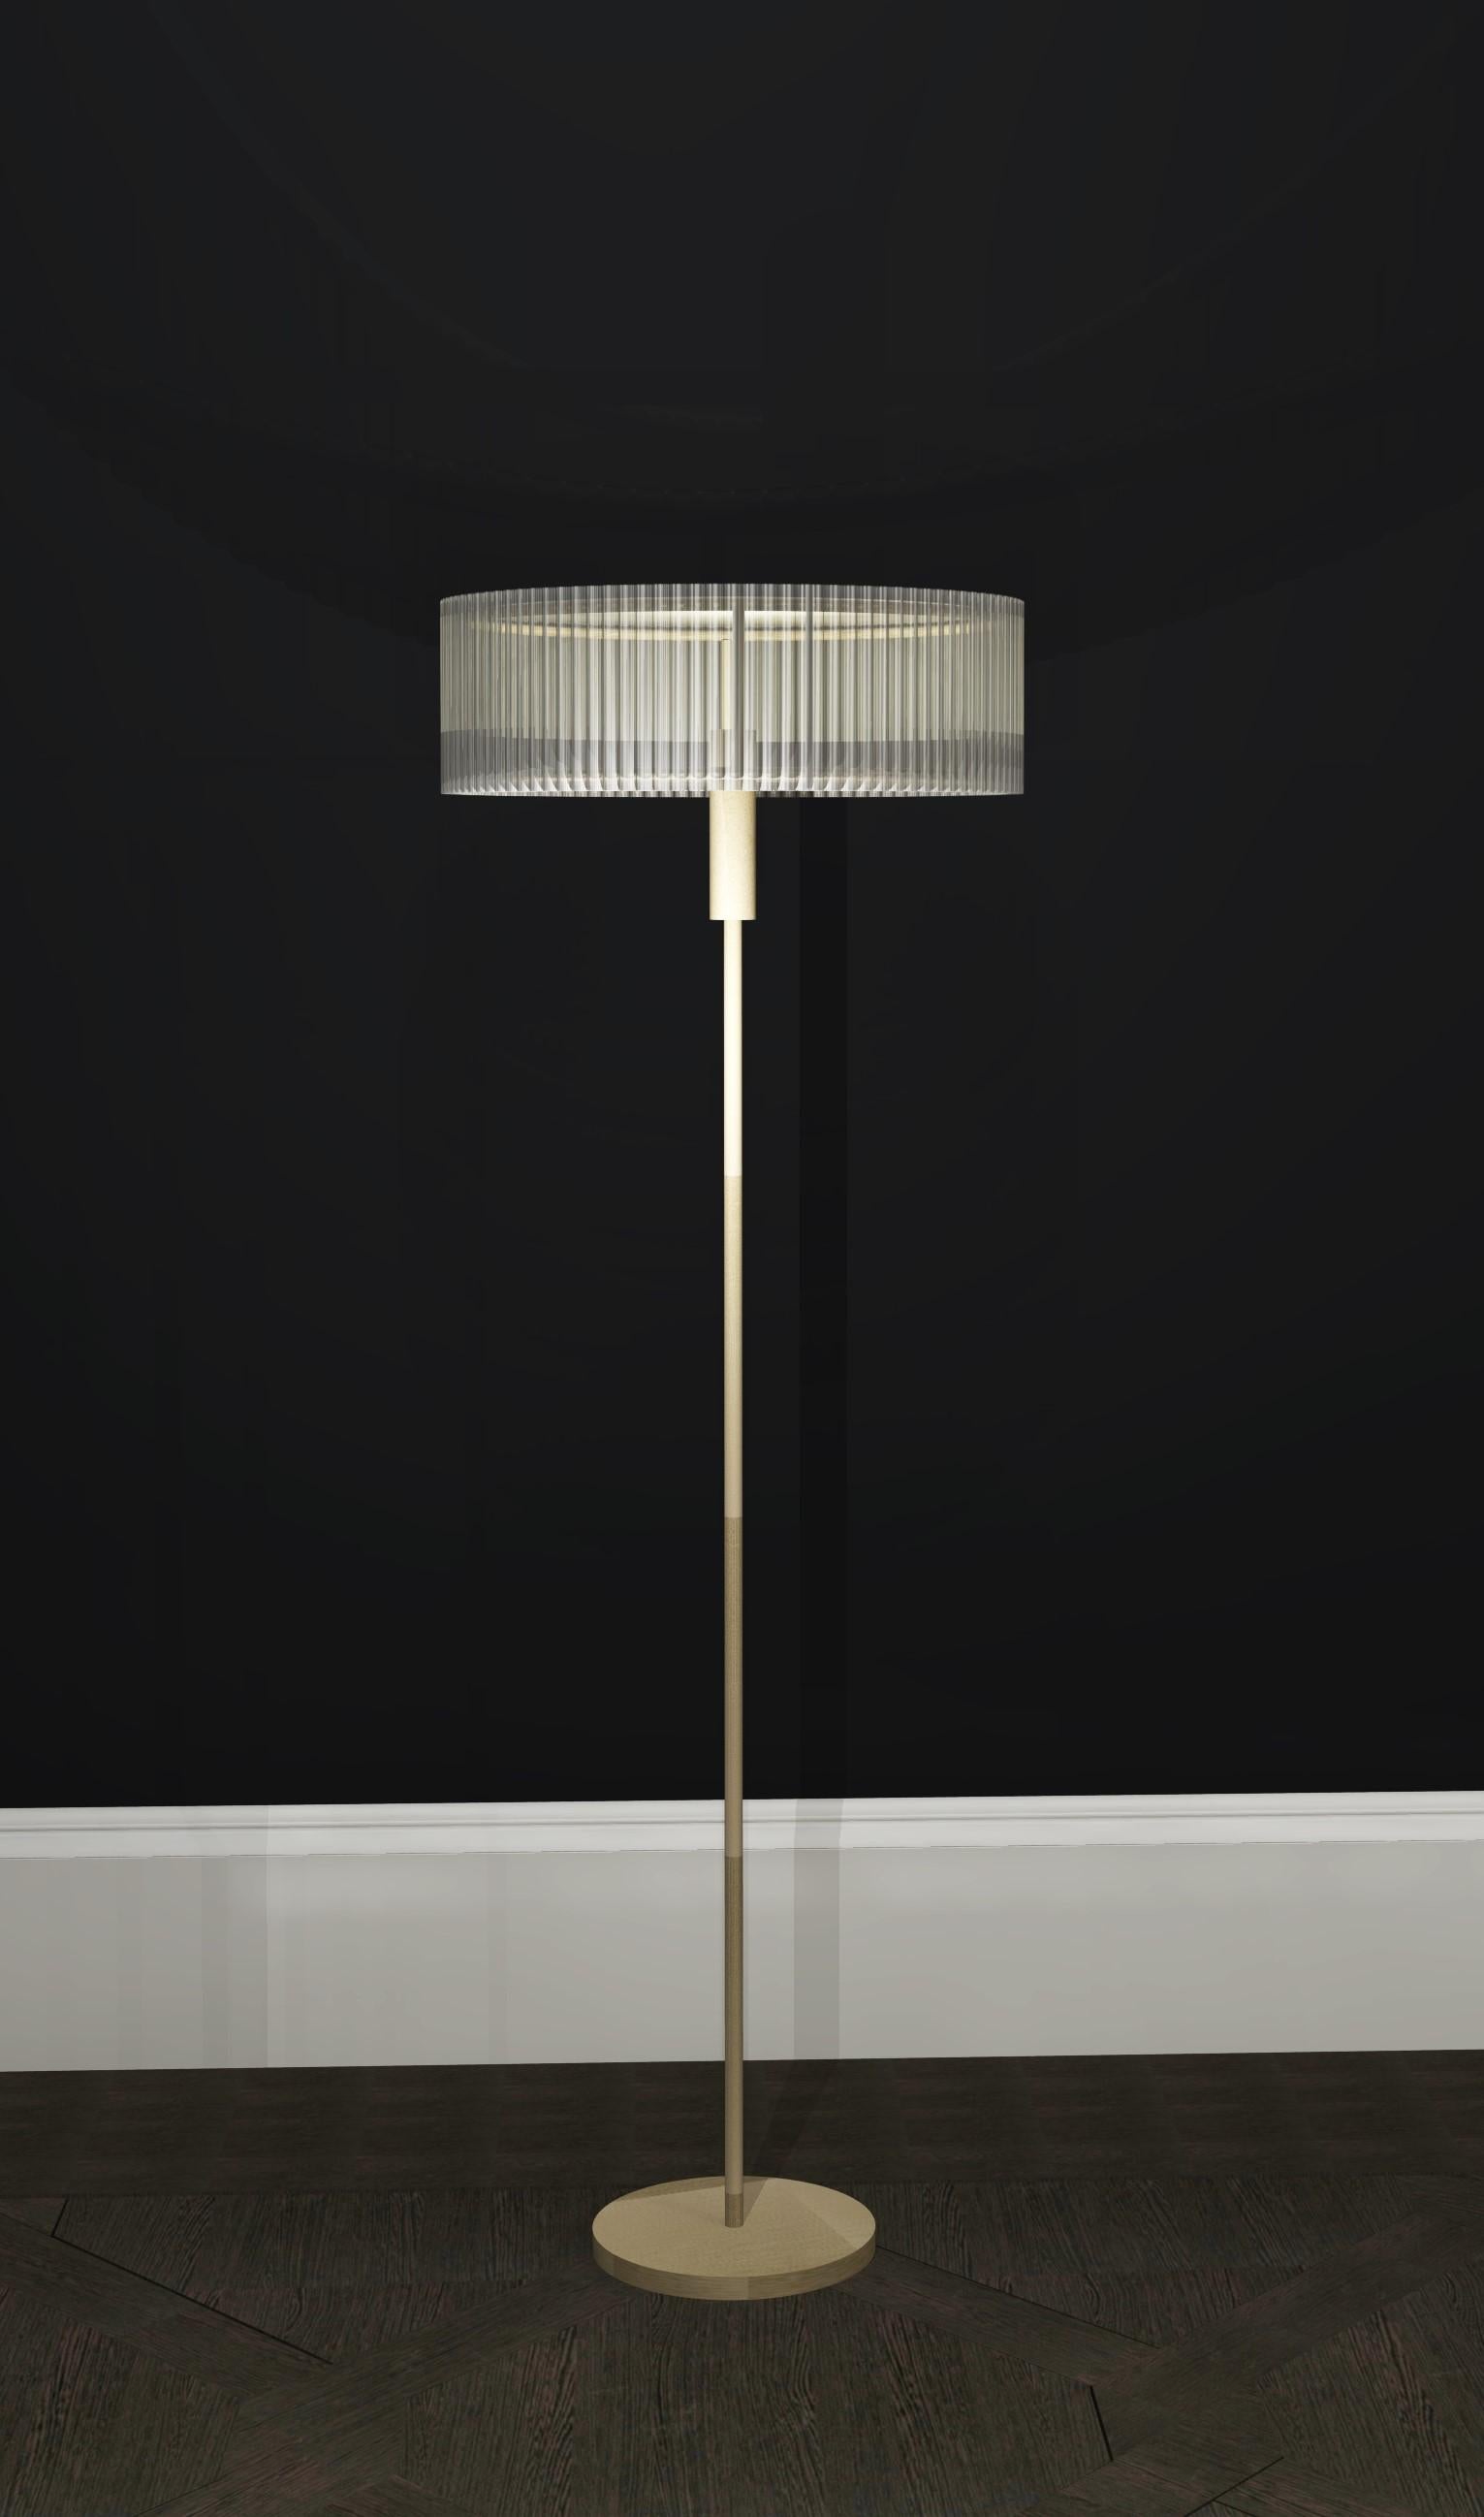 Contemporary floor lamp in fluted glass and brushed brass finish.

Diameter: 500mm 
Height: 1415mm
Base Dia: 250mm

Made to order to buyer's specification. Variations to dimensions and finishes can be made.